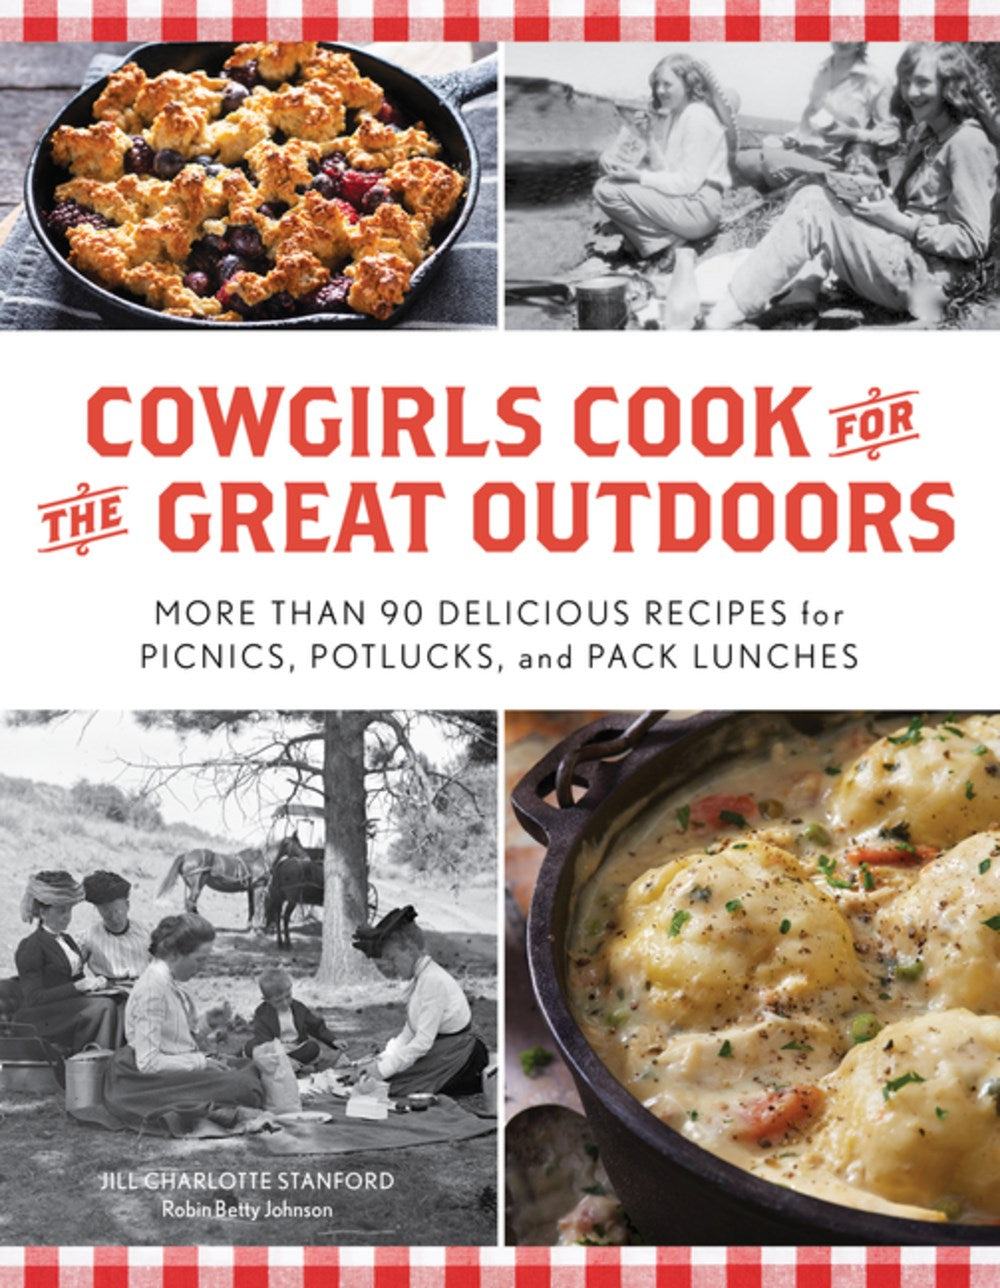 Cowgirls Cook for the Great Outdoors : More than 90 Delicious Recipes for Picnics, Potlucks, and Pack Lunches